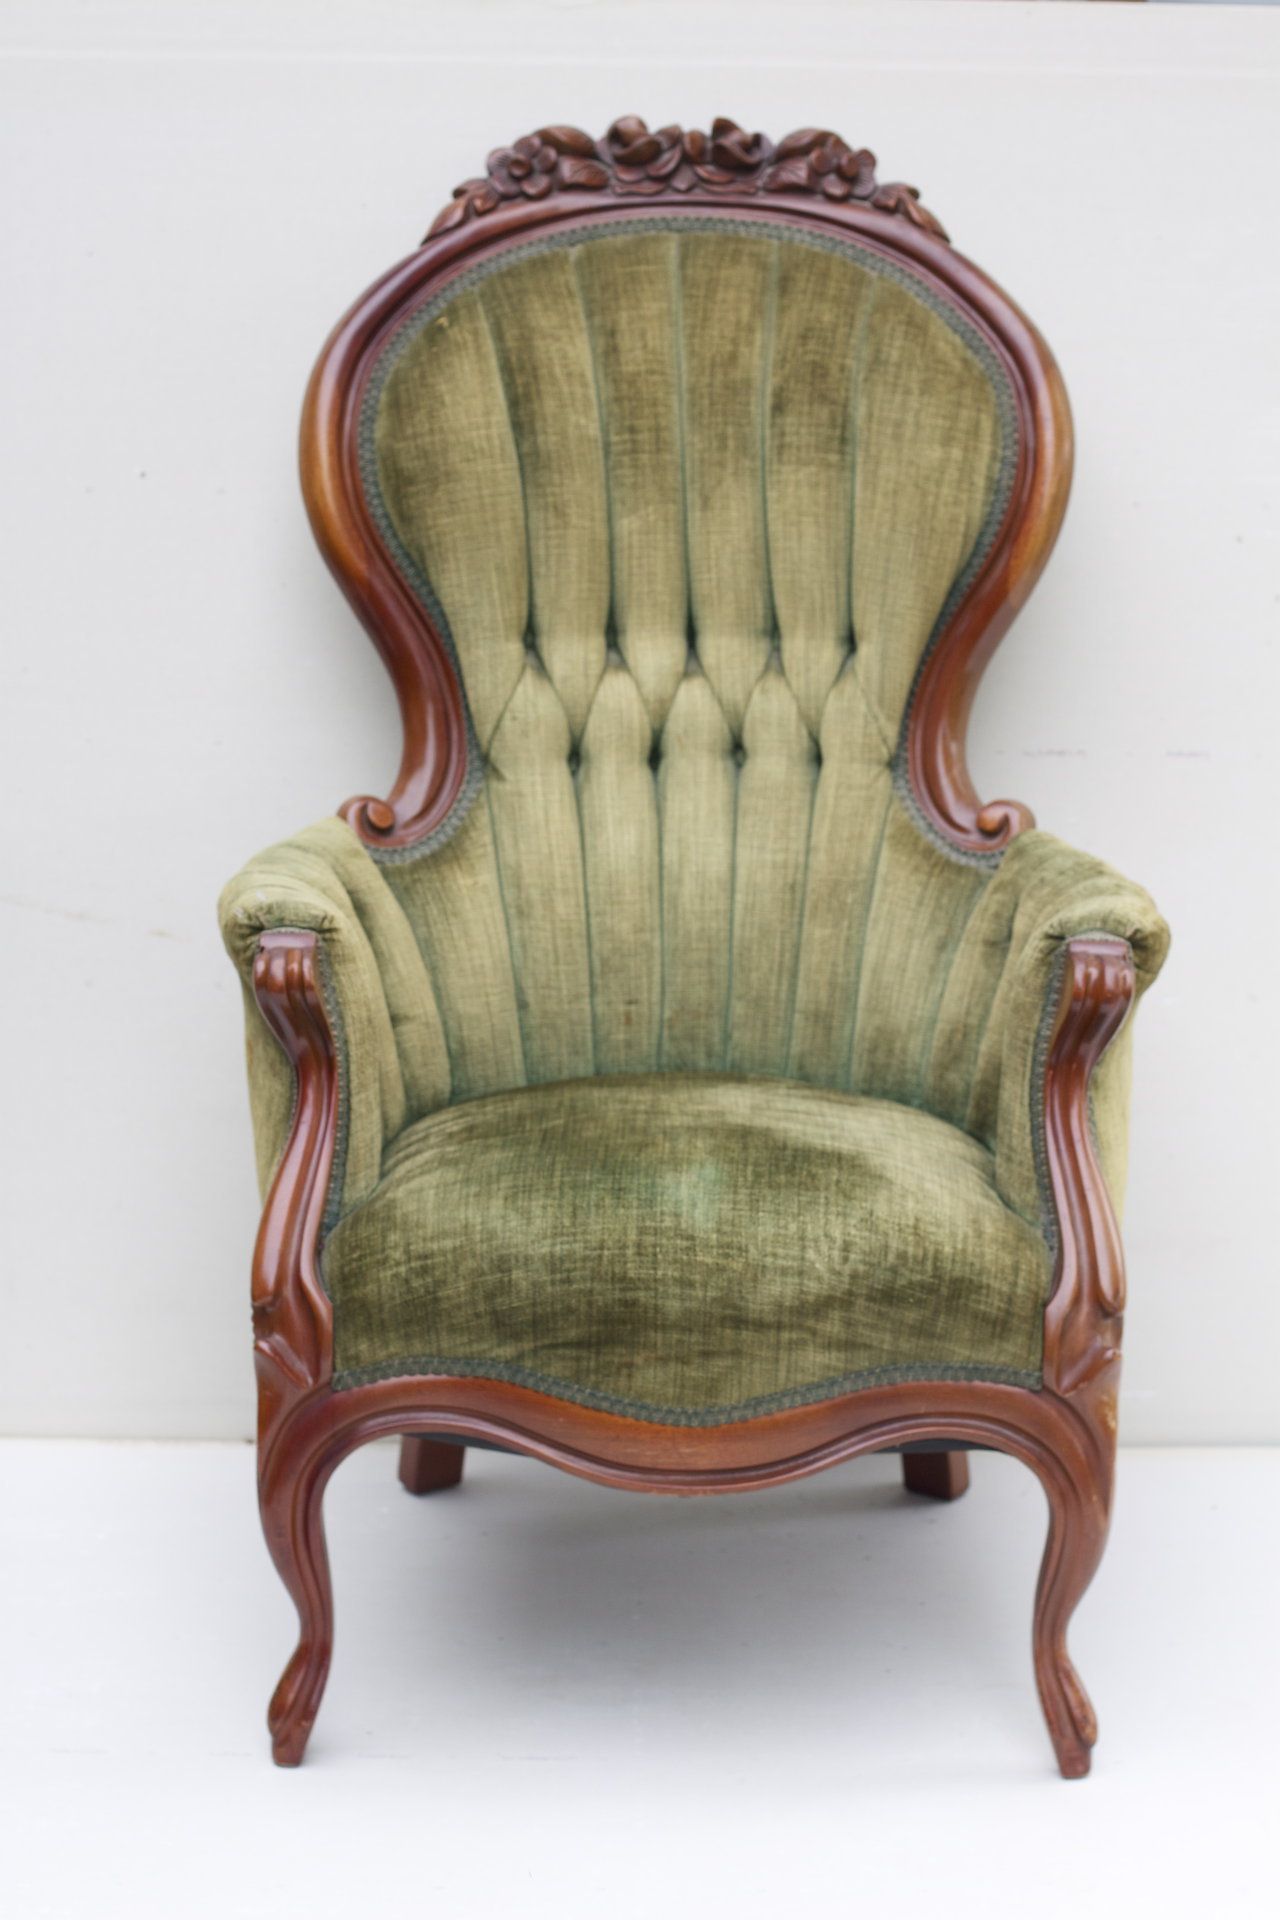 Vintage Chair with tufted sage green chenille upholstery and cherry wood  frame. Description from Traveller Location. I searched for this on  Traveller Location/images